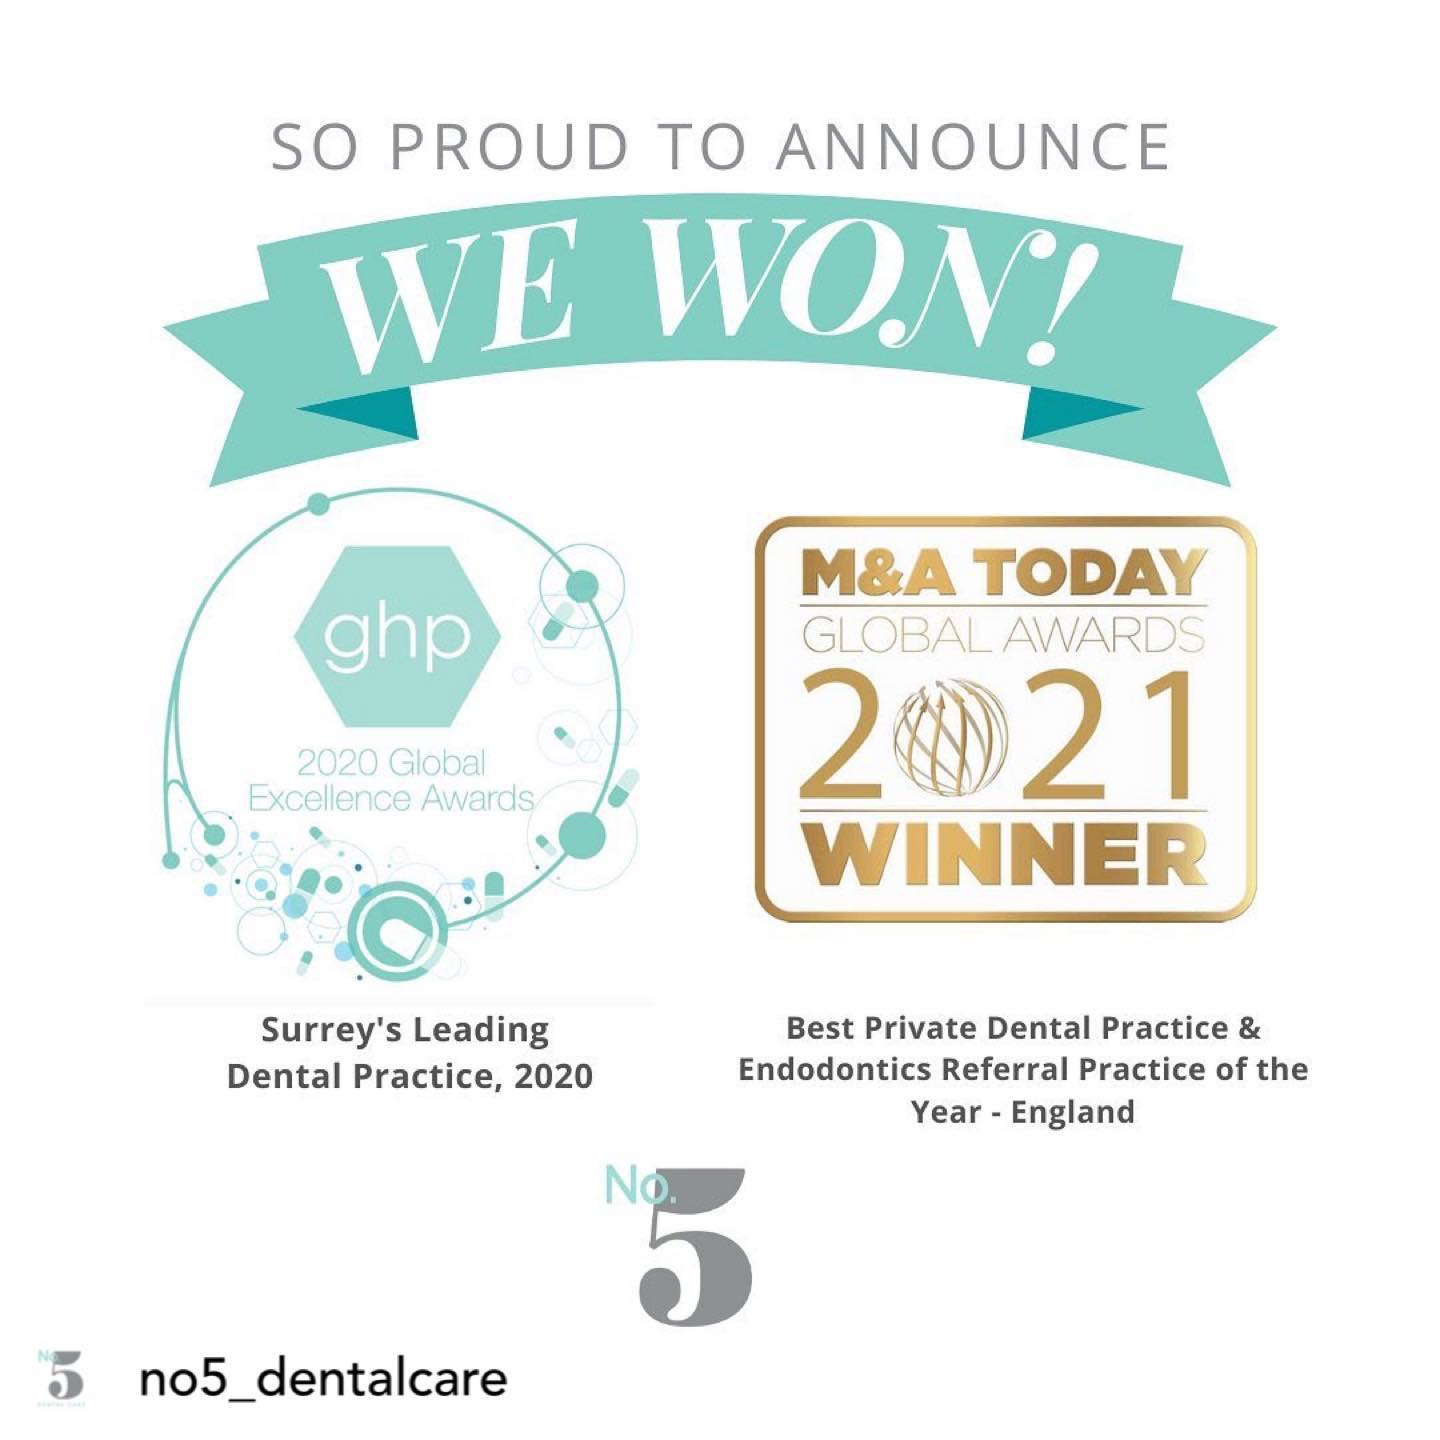 Congrats to our friends @no5_dentalcare on their latest awards!